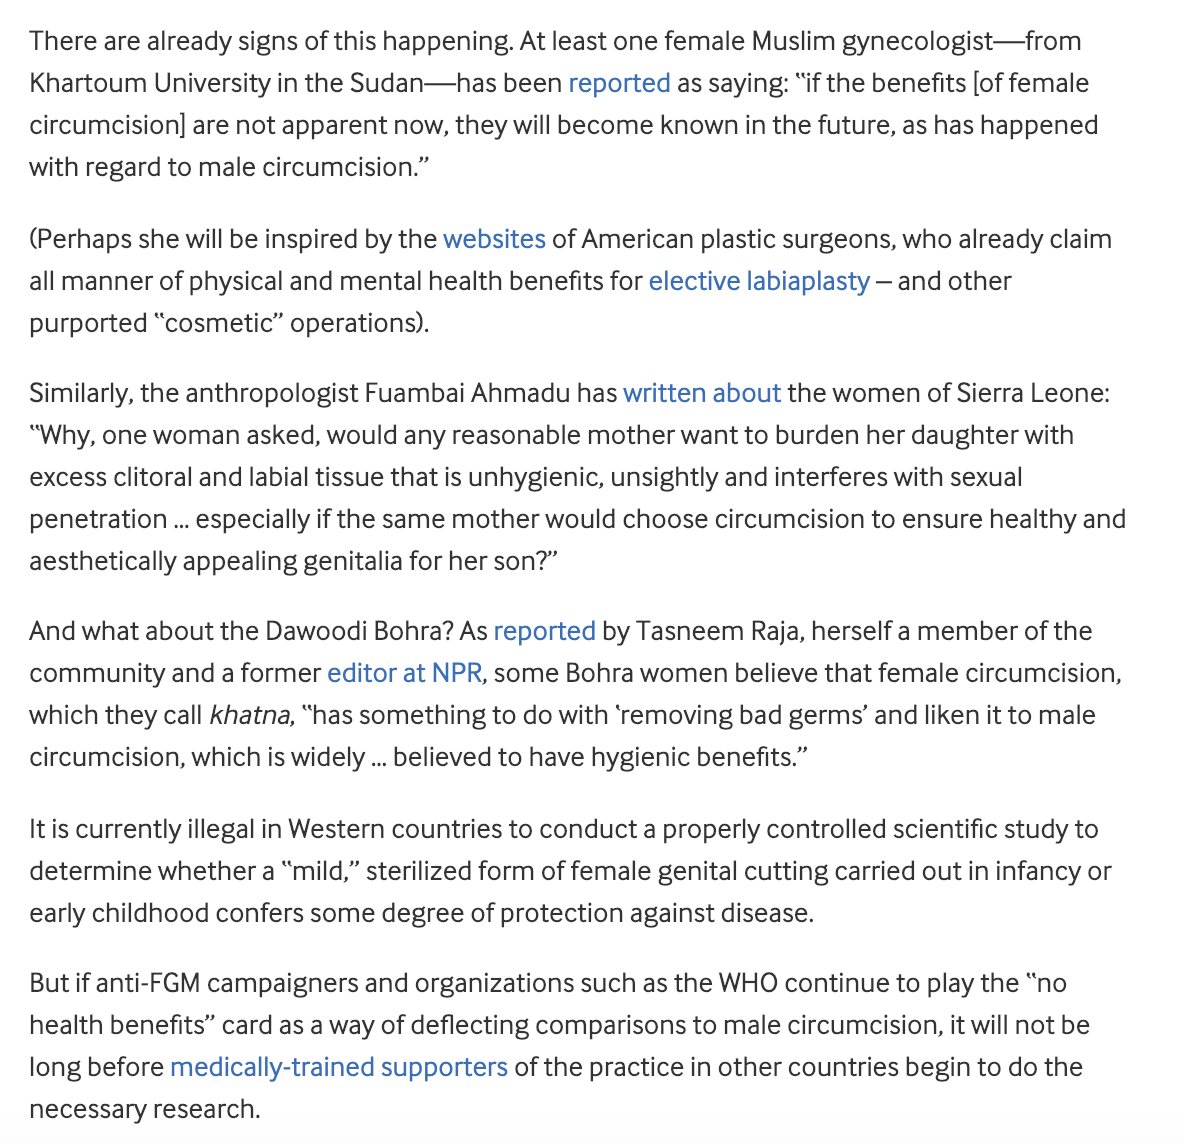 of what they call "female circumcision" to try to find "health benefits" for their *own* culturally favored rituals, which is exactly what some are now doing (see screen shots below, from my discussion here  https://bit.ly/2F78yCl ). But this is to miss the point. Genital cutting